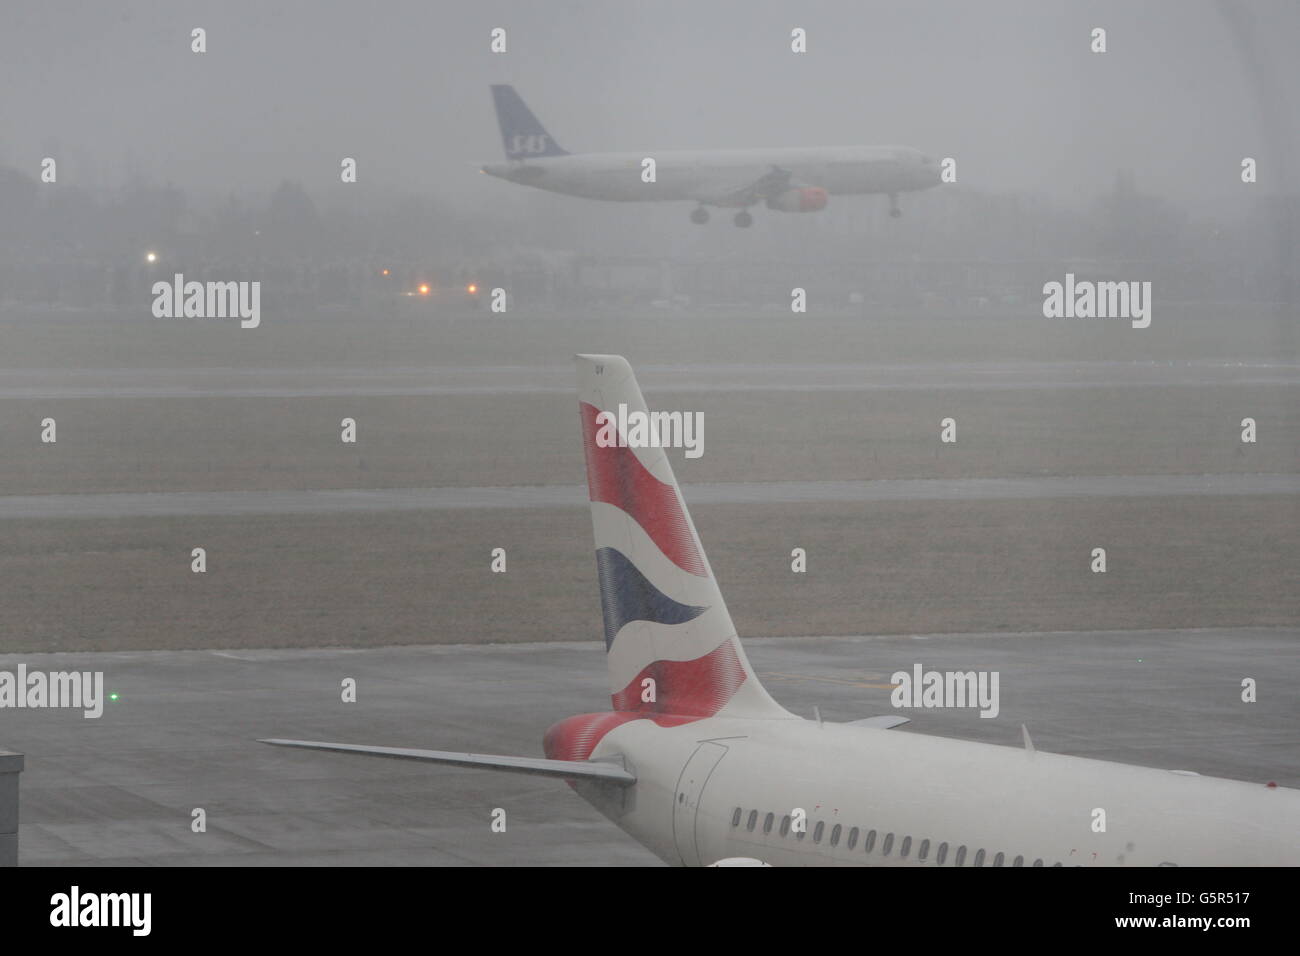 A plane comes in to land at Heathrow airport as the forecast suggests snow will reach the London area later today after snow shut roads and disrupted train travel today in other parts of the UK, but the major commuter belt areas of southern England escaped the worst of the morning hazards. Stock Photo